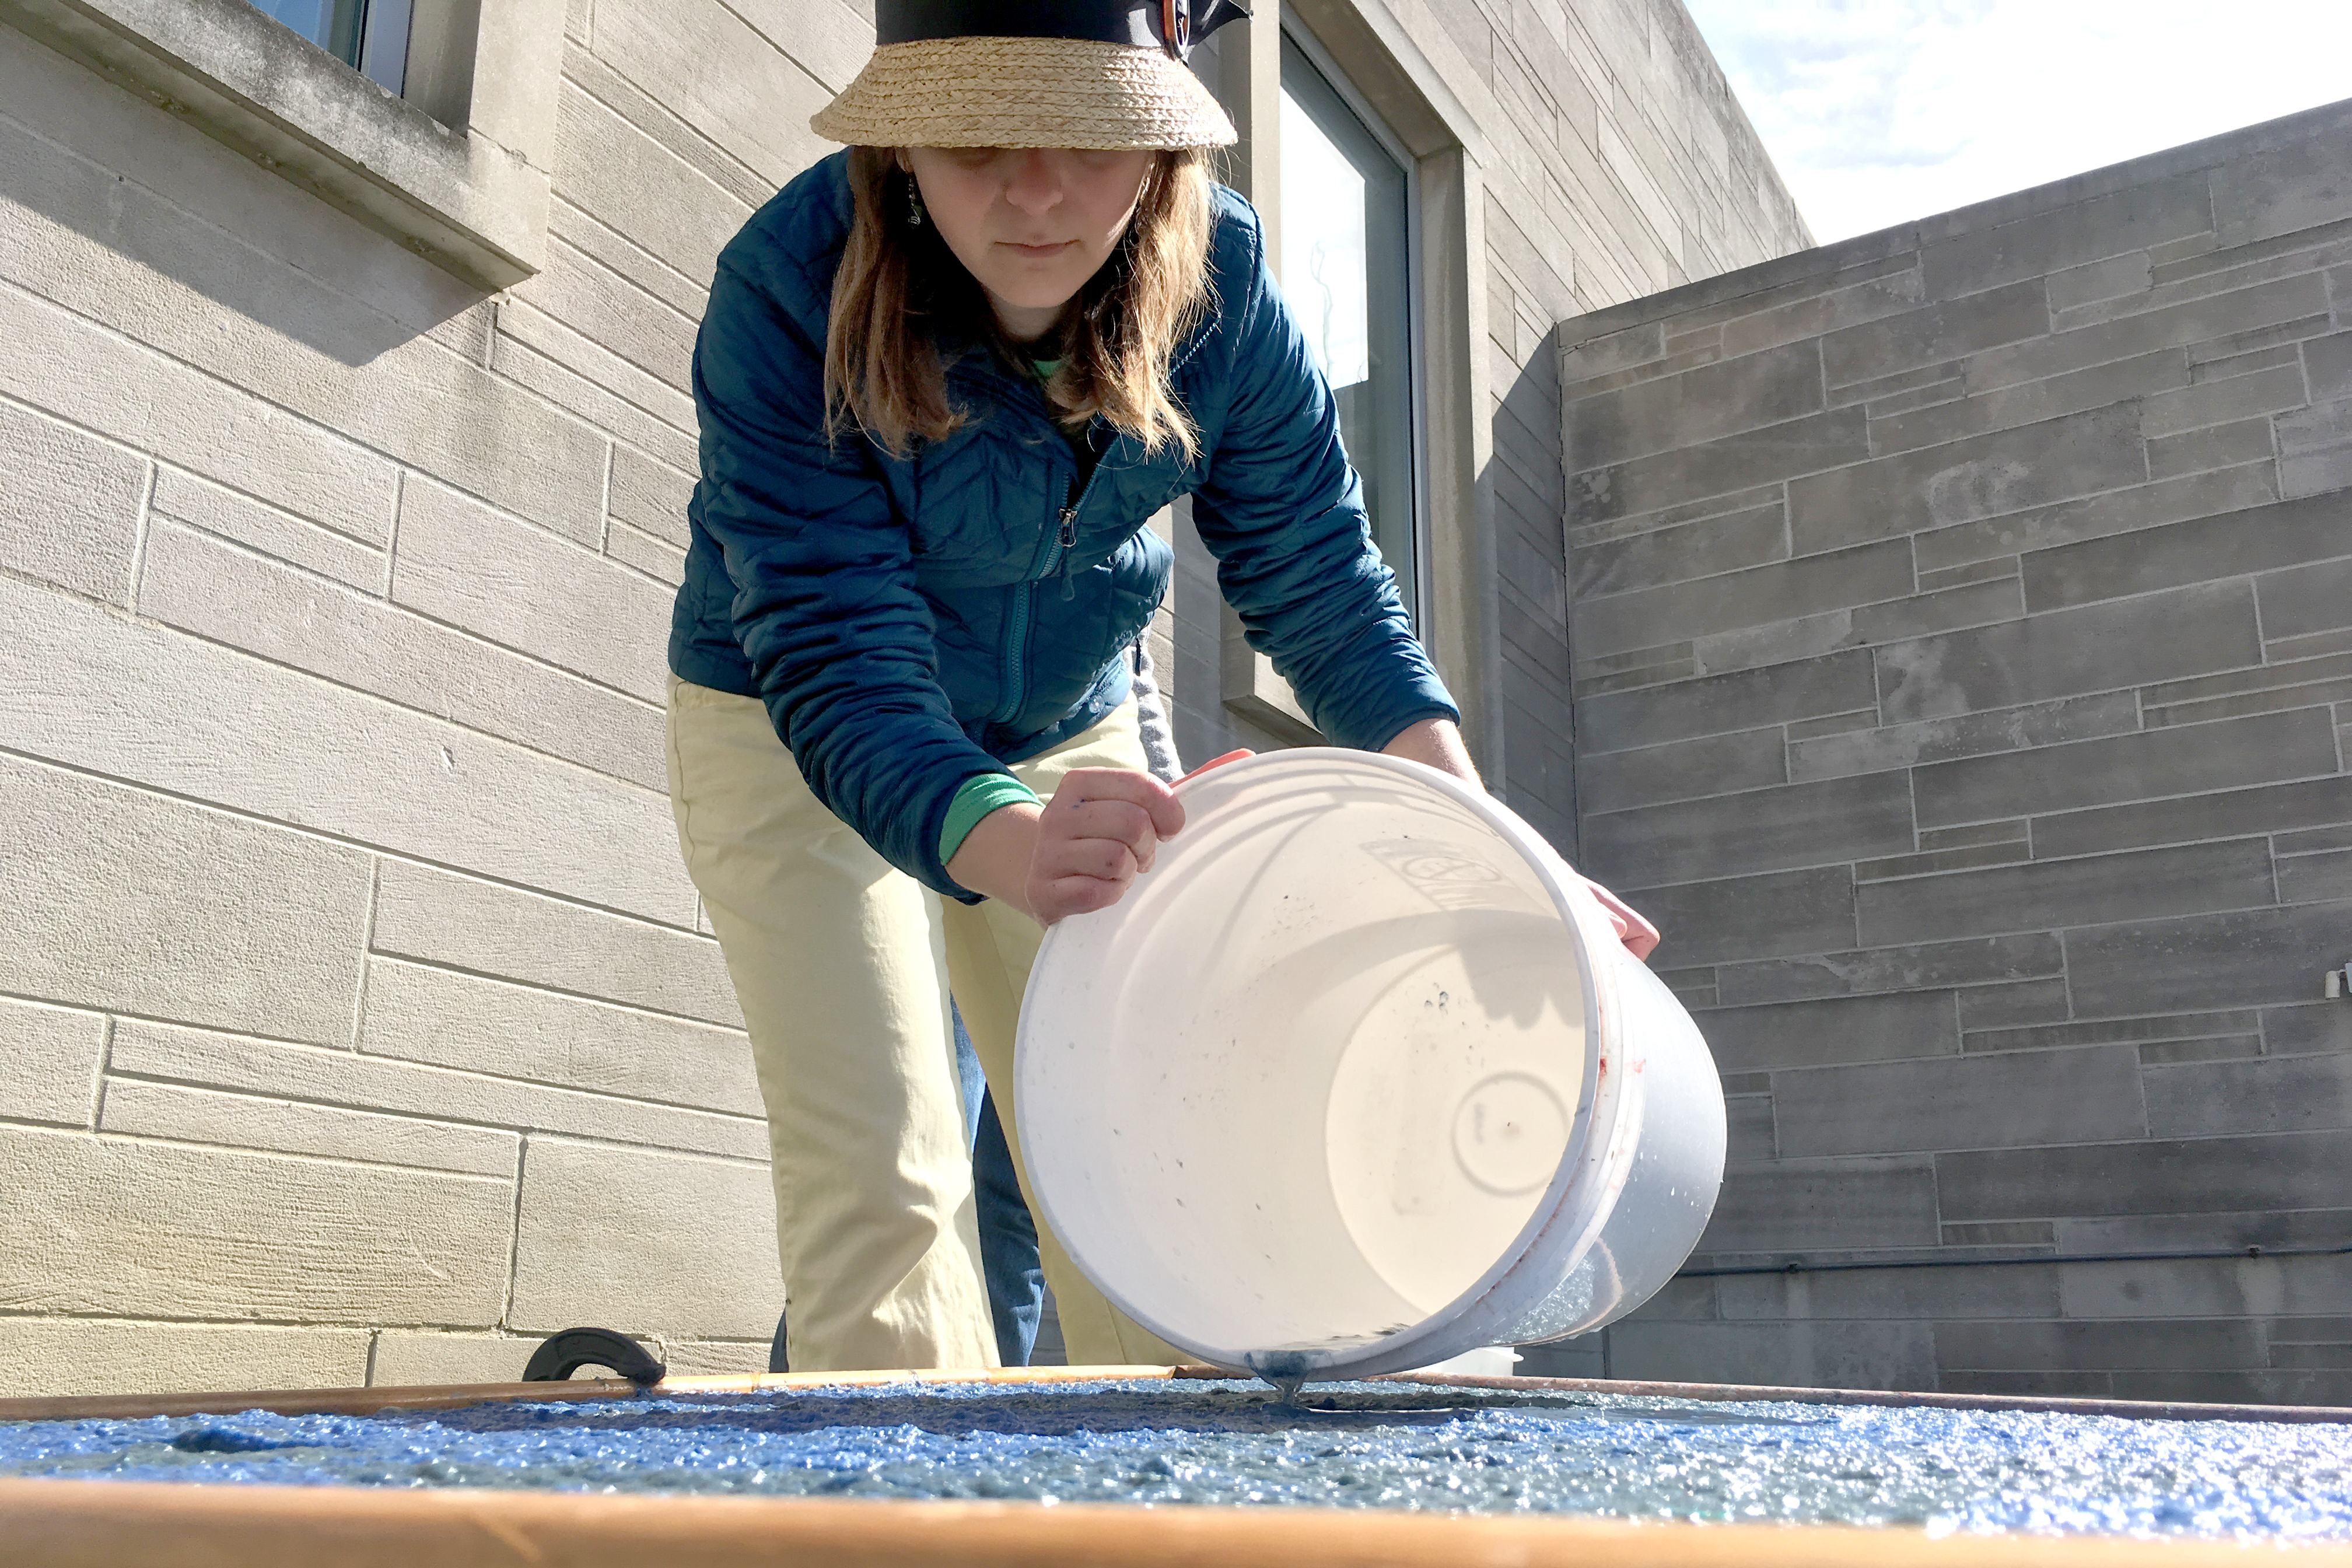 Artist Laura Post is shown outdoors pouring liquid from a bucket